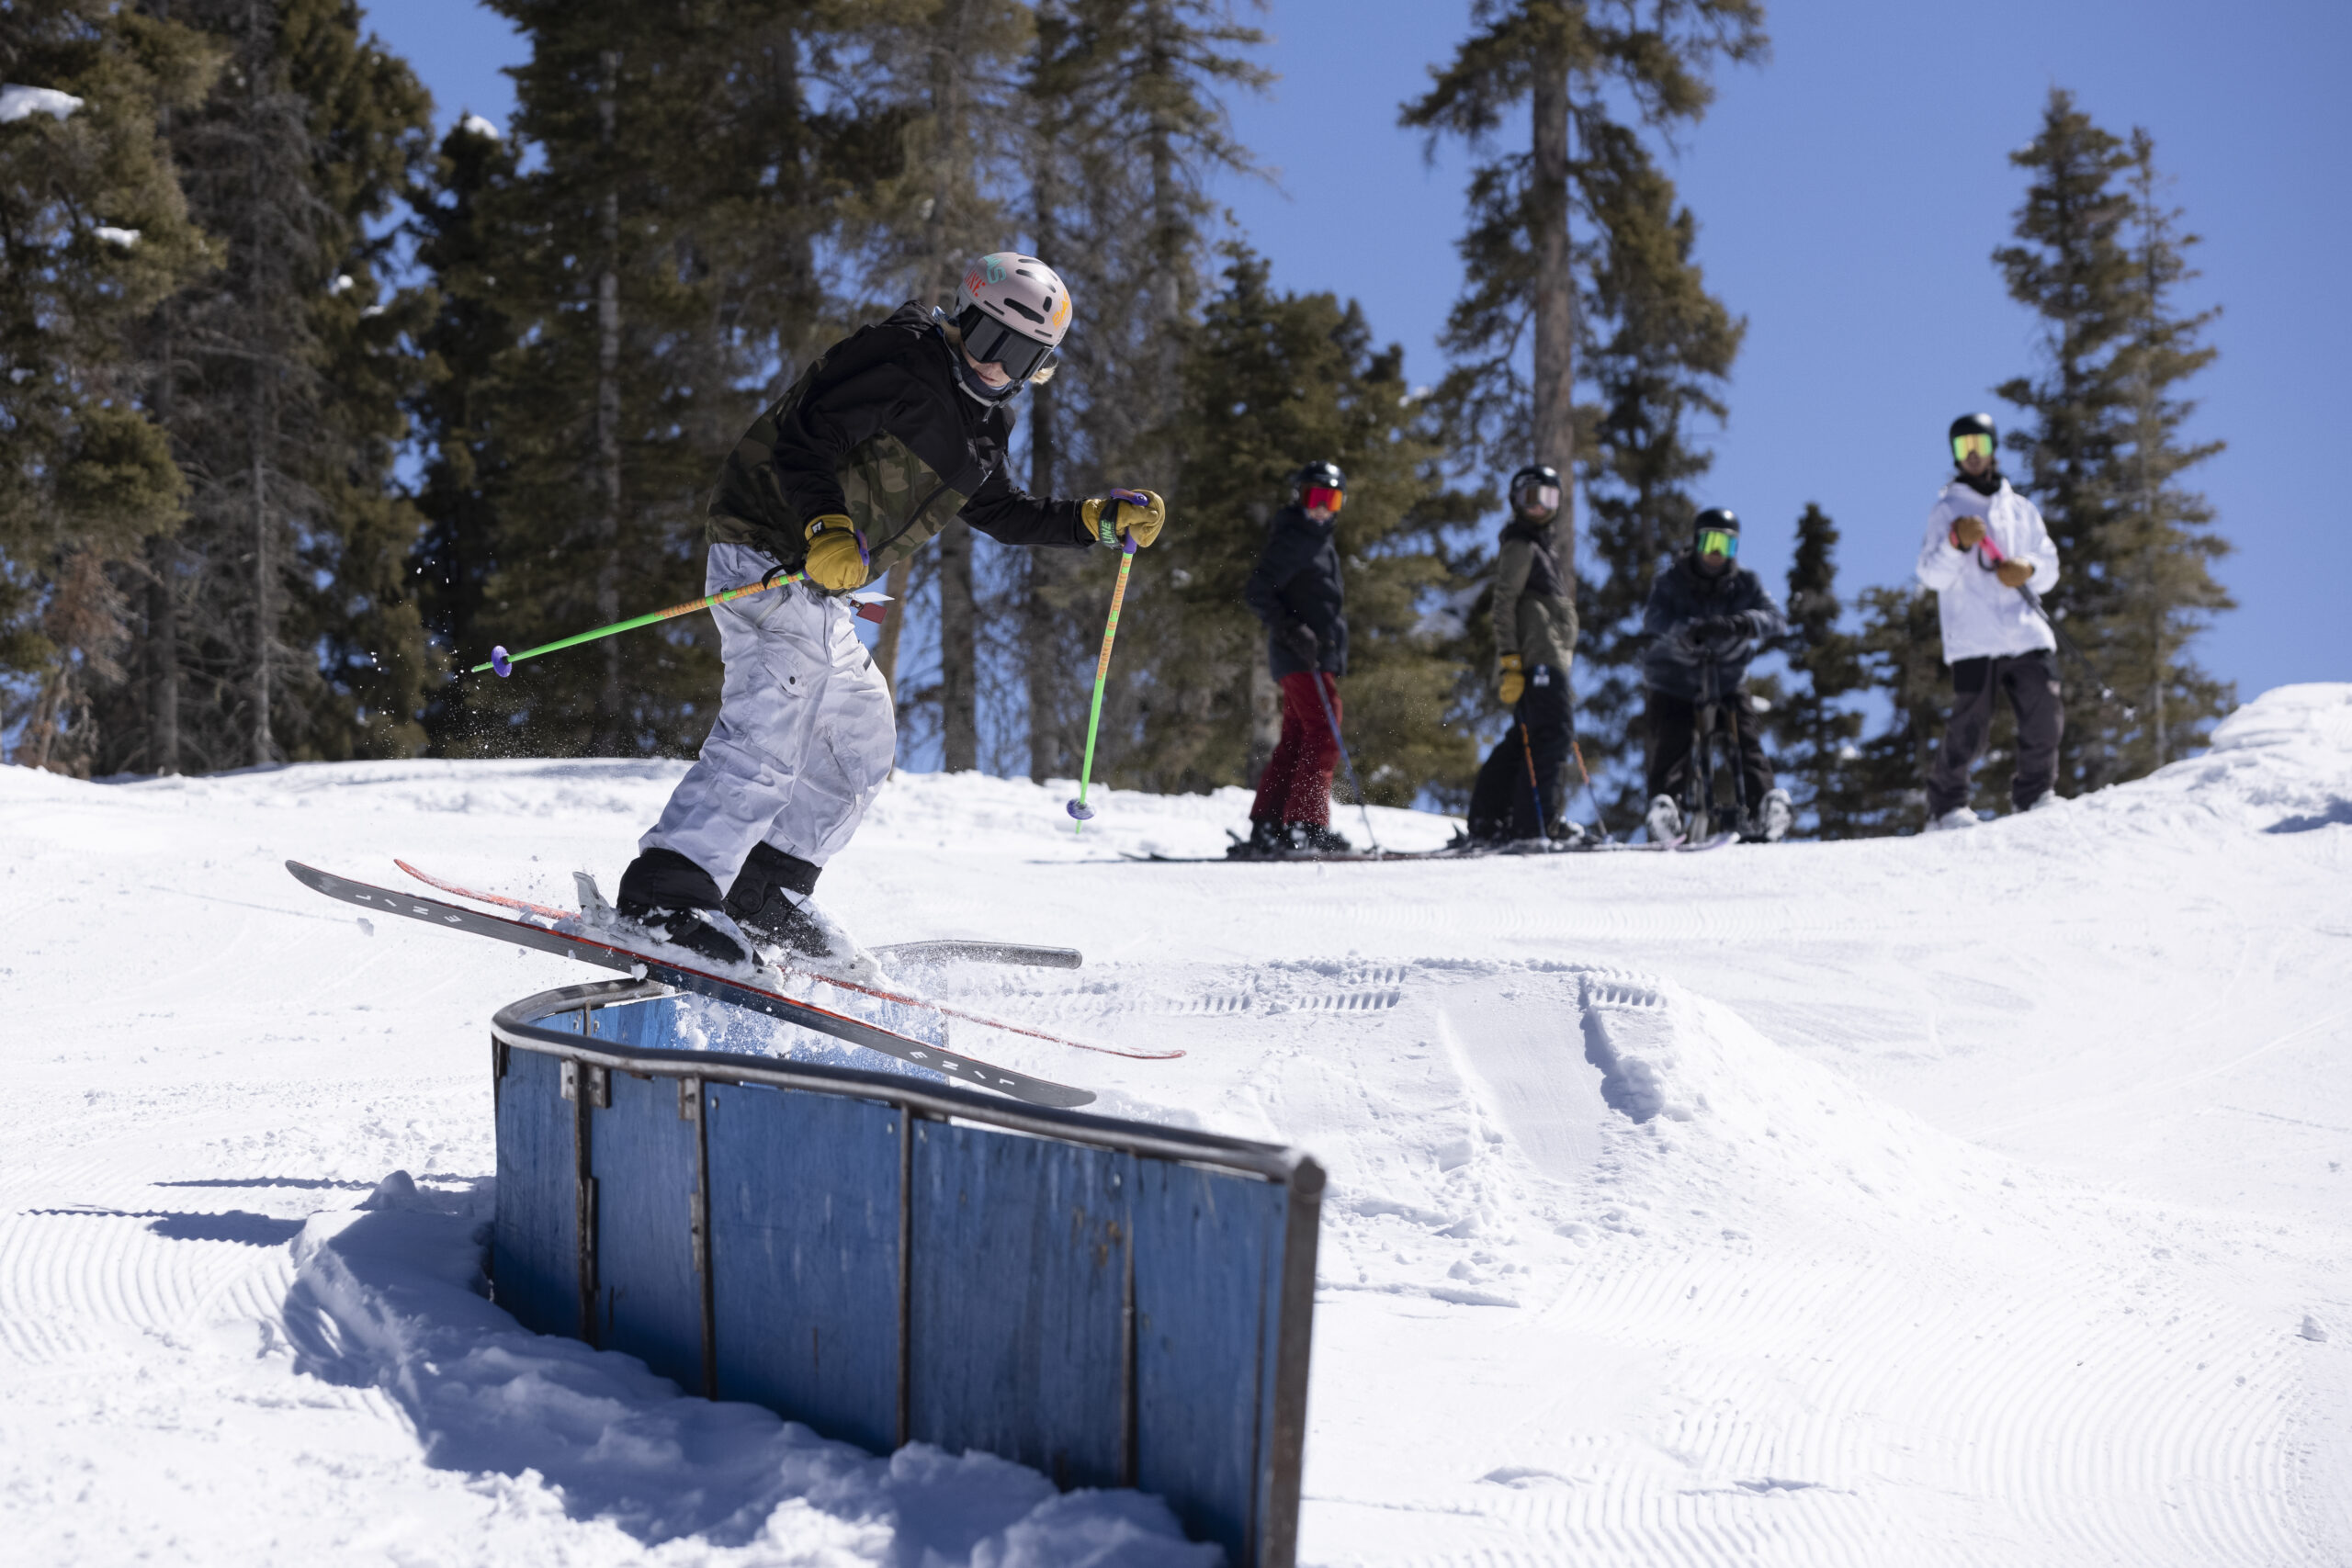 A skier slides along the rails during a rail jam competition